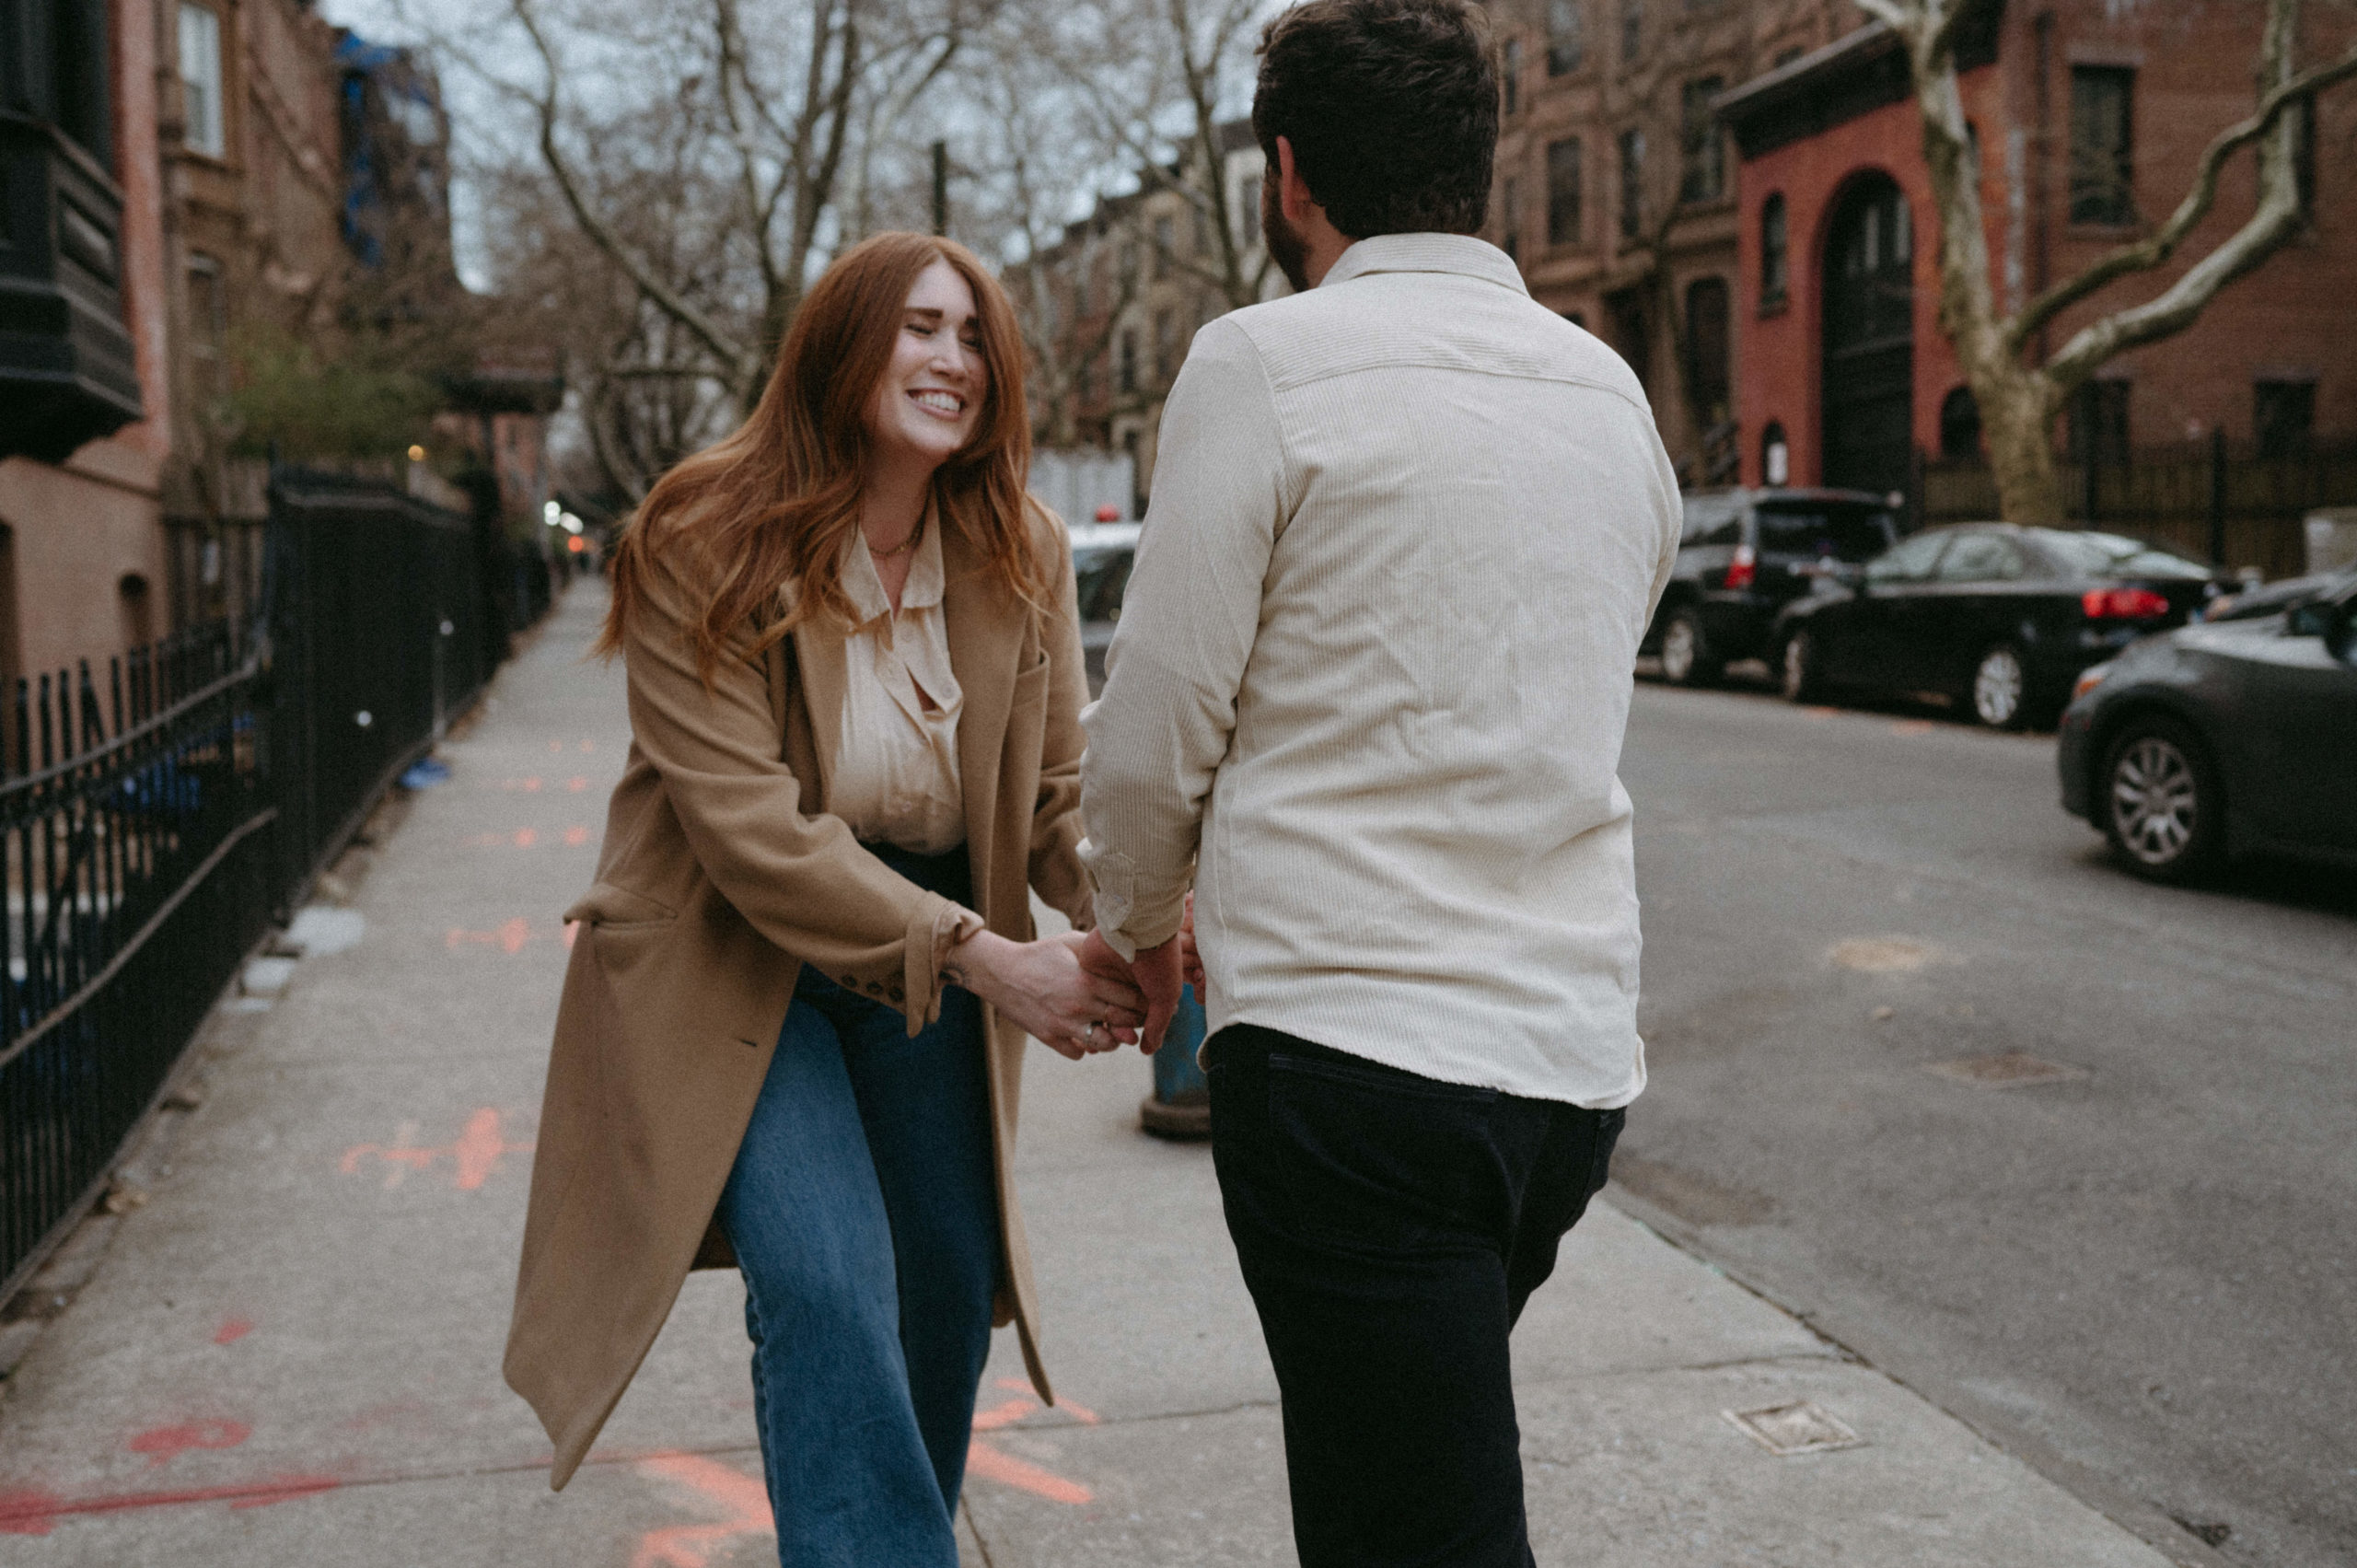 Couple smiling on the street in Brooklyn, NY